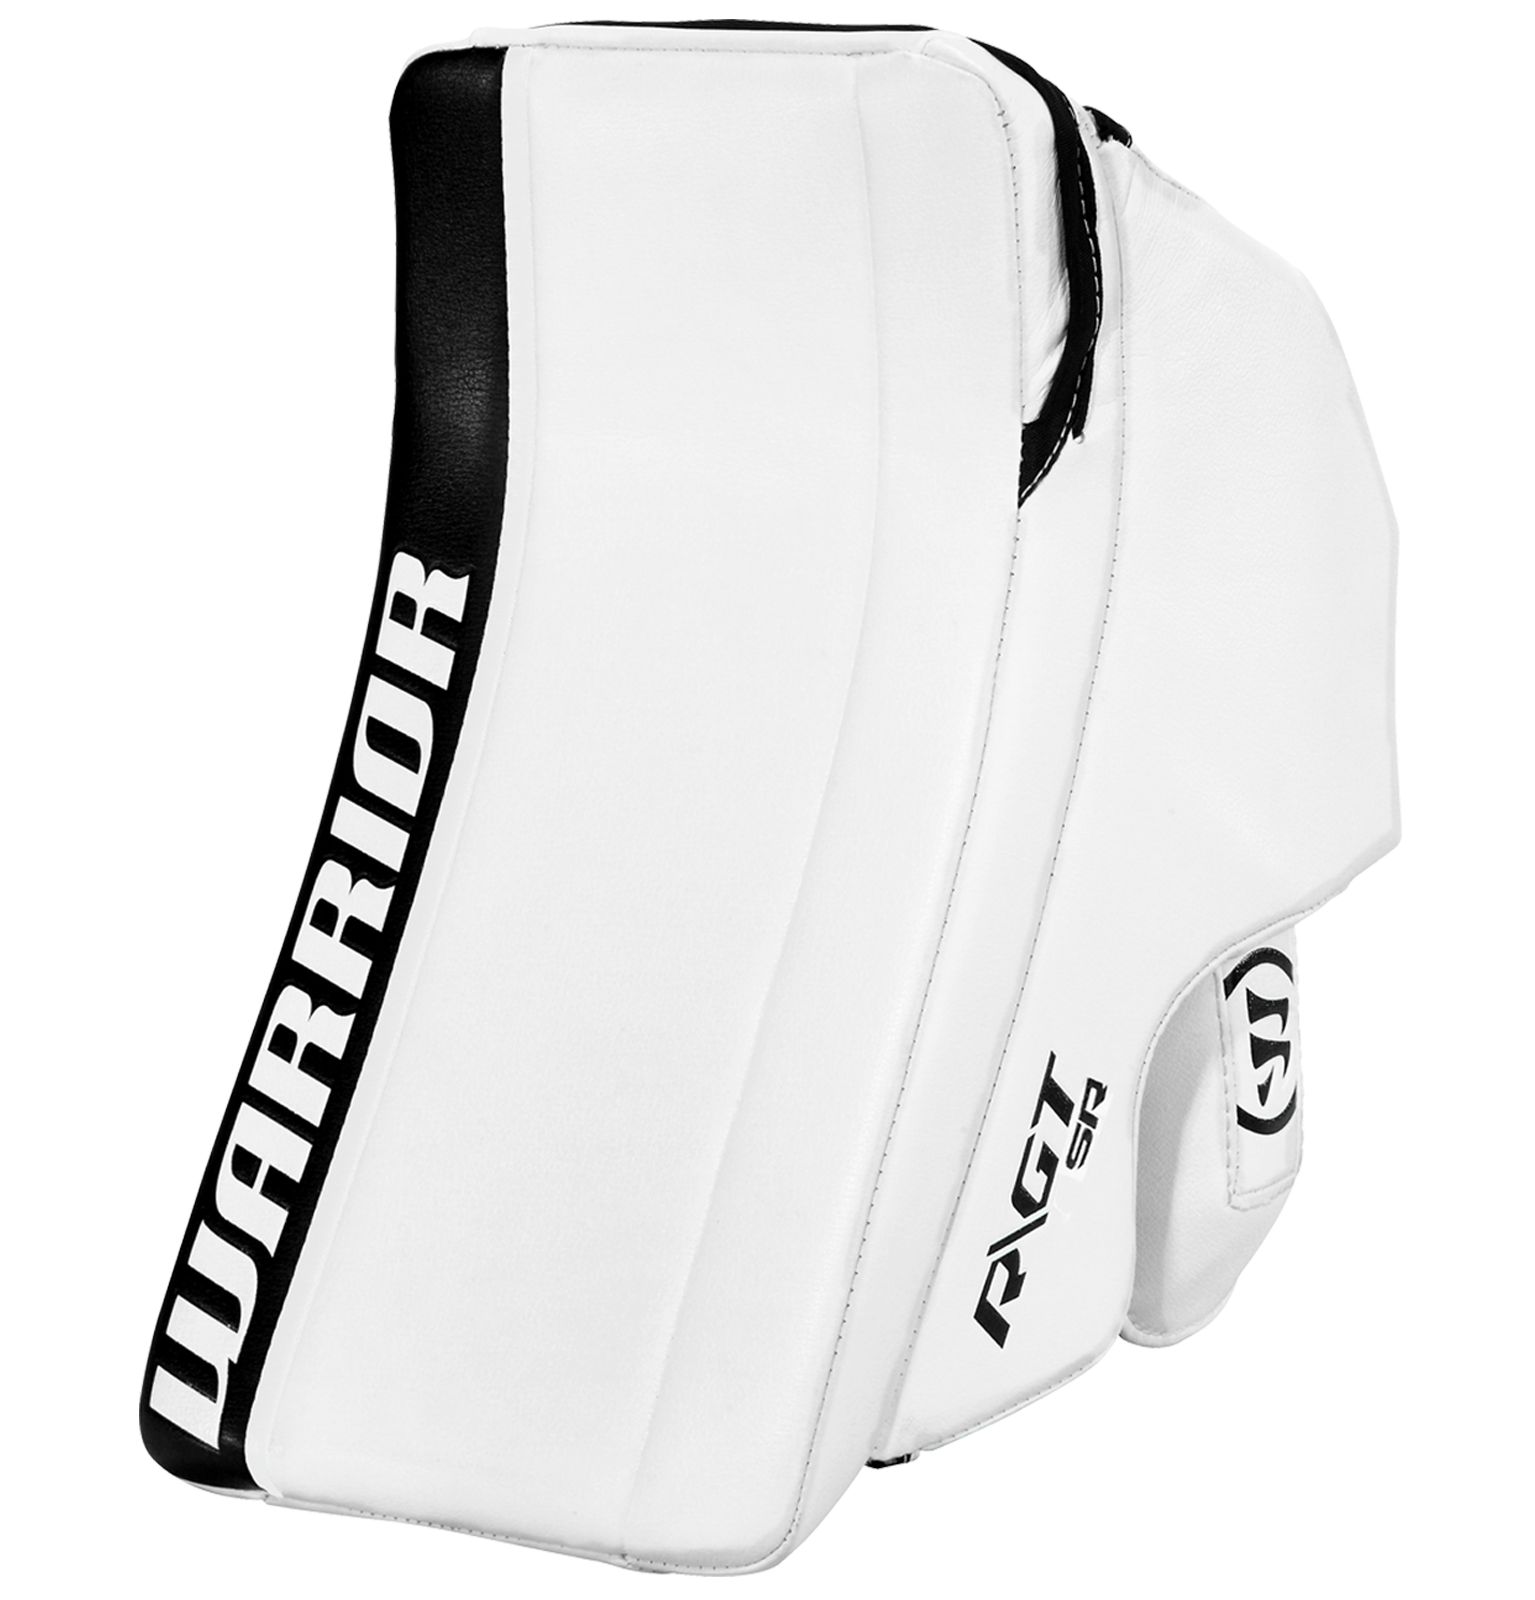 Ritual GT SR Classic Blocker, White with Black image number 0